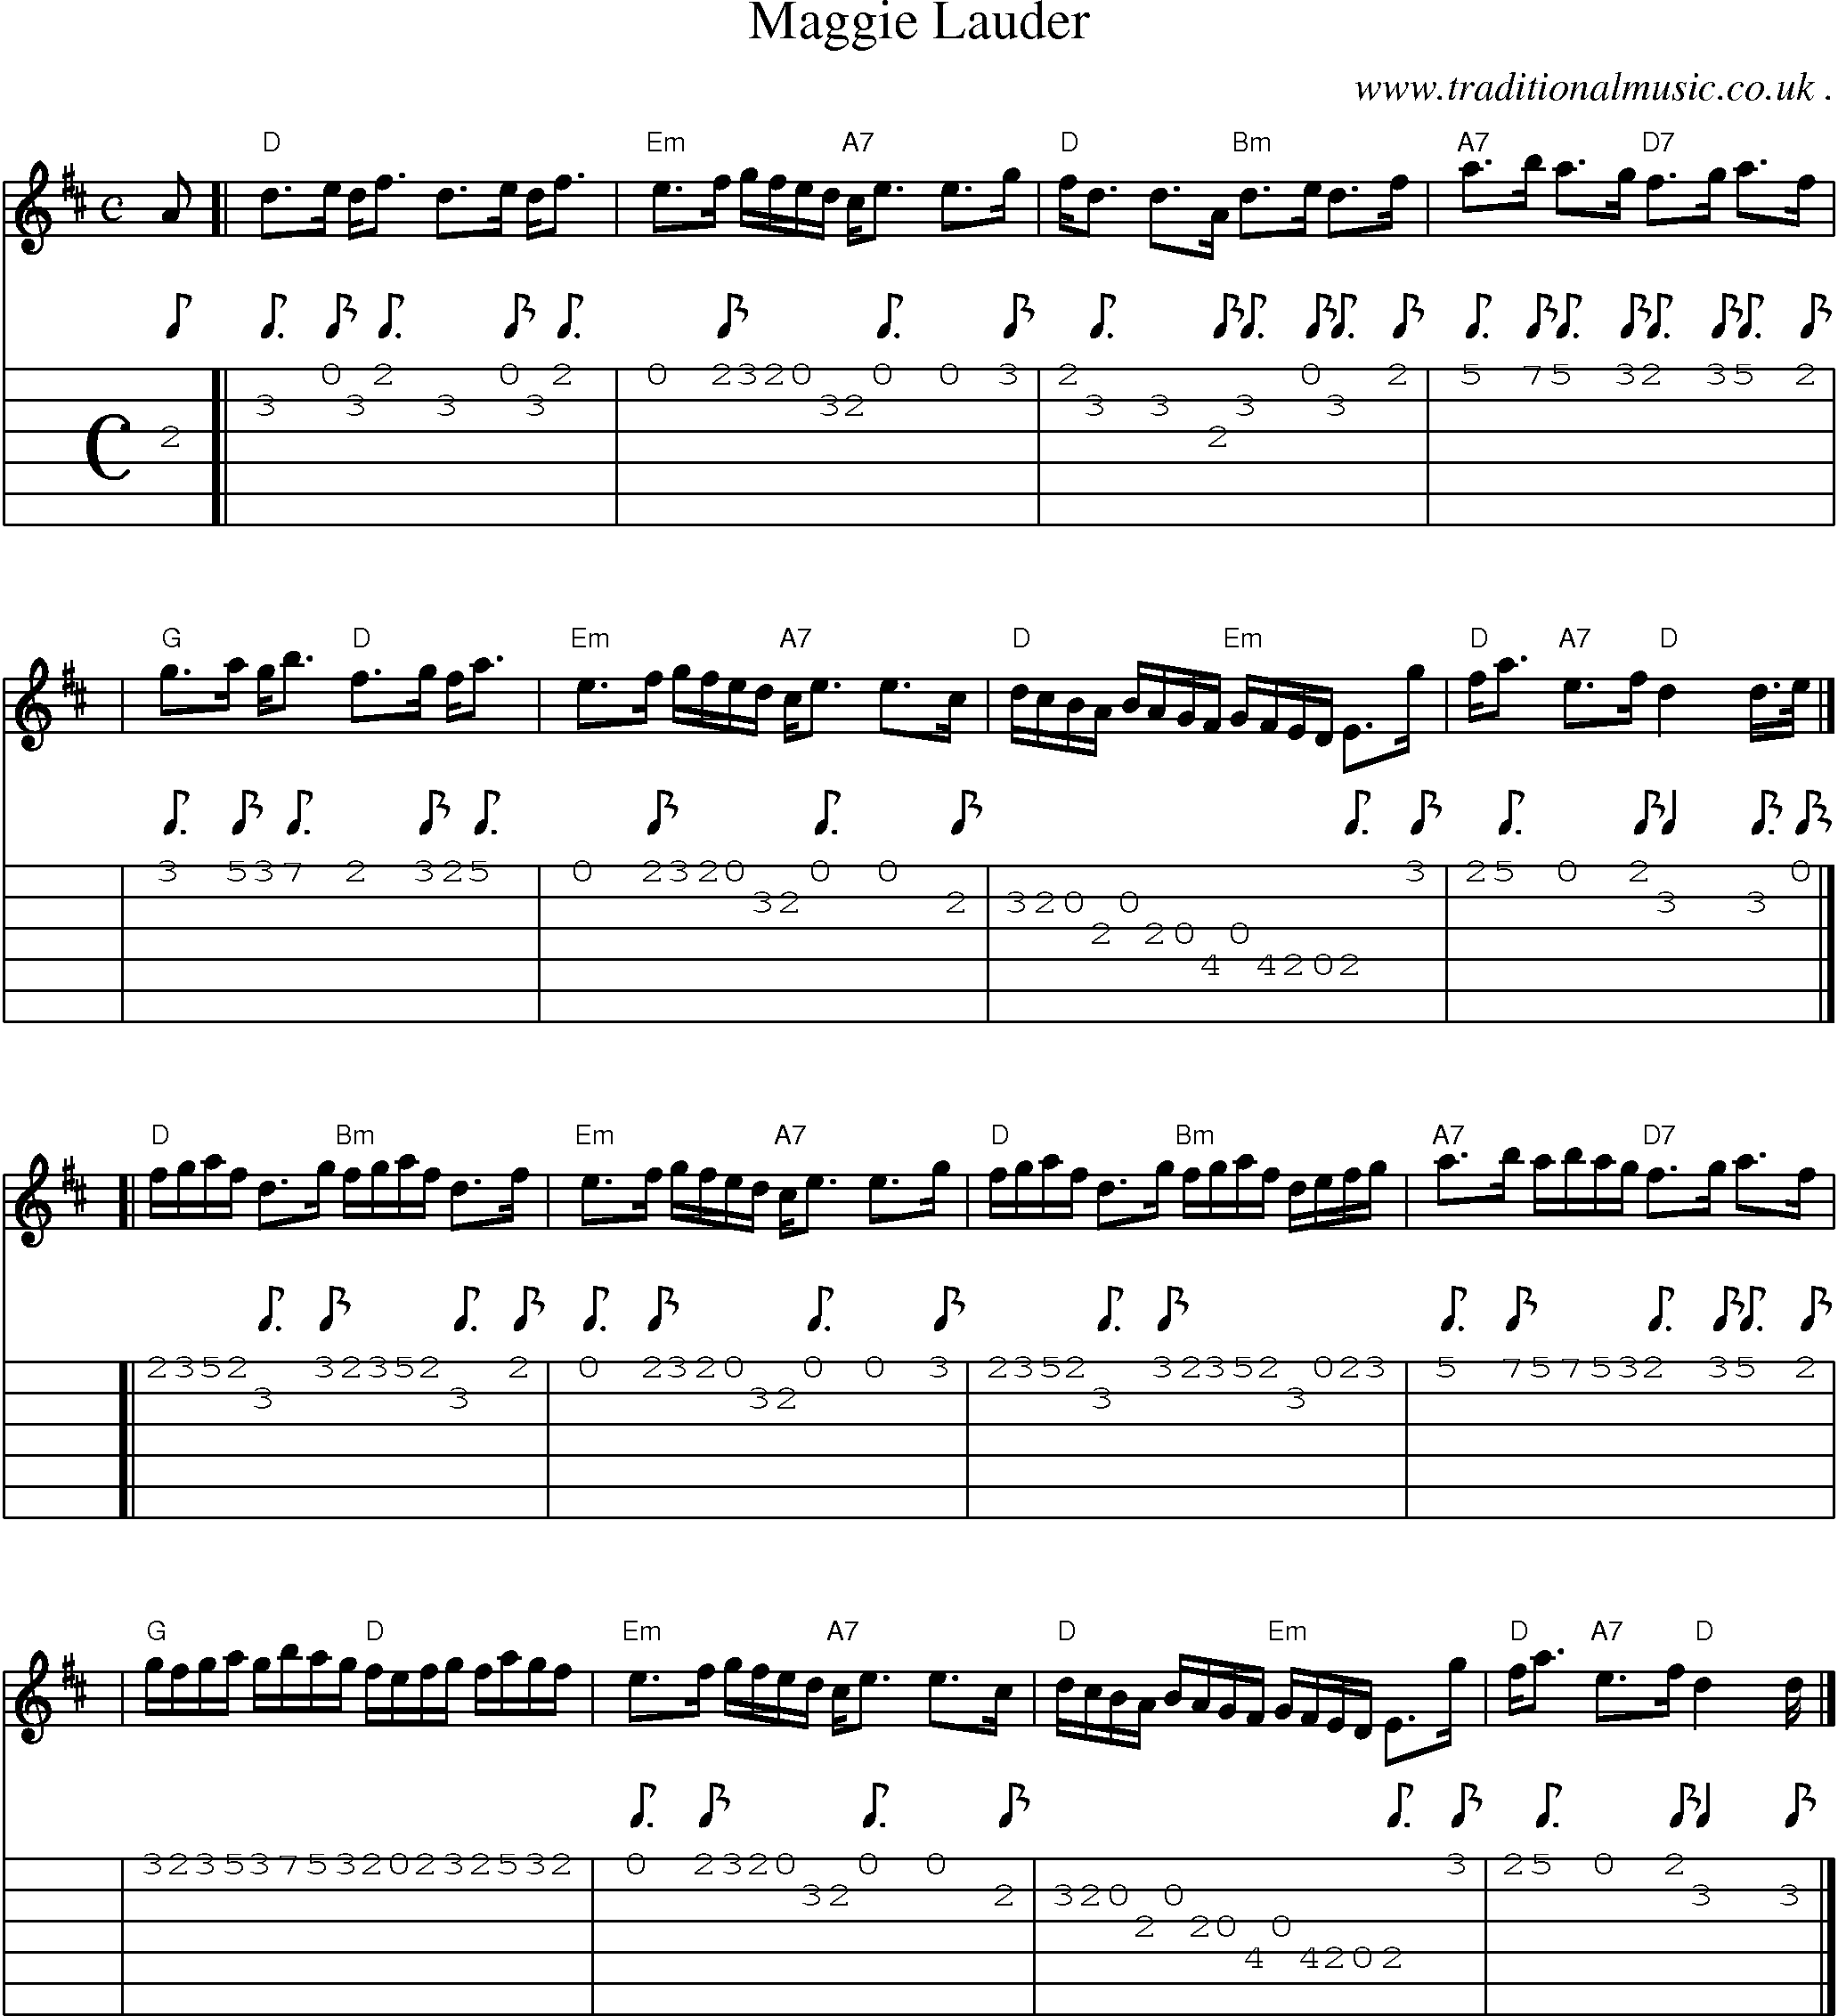 Sheet-music  score, Chords and Guitar Tabs for Maggie Lauder